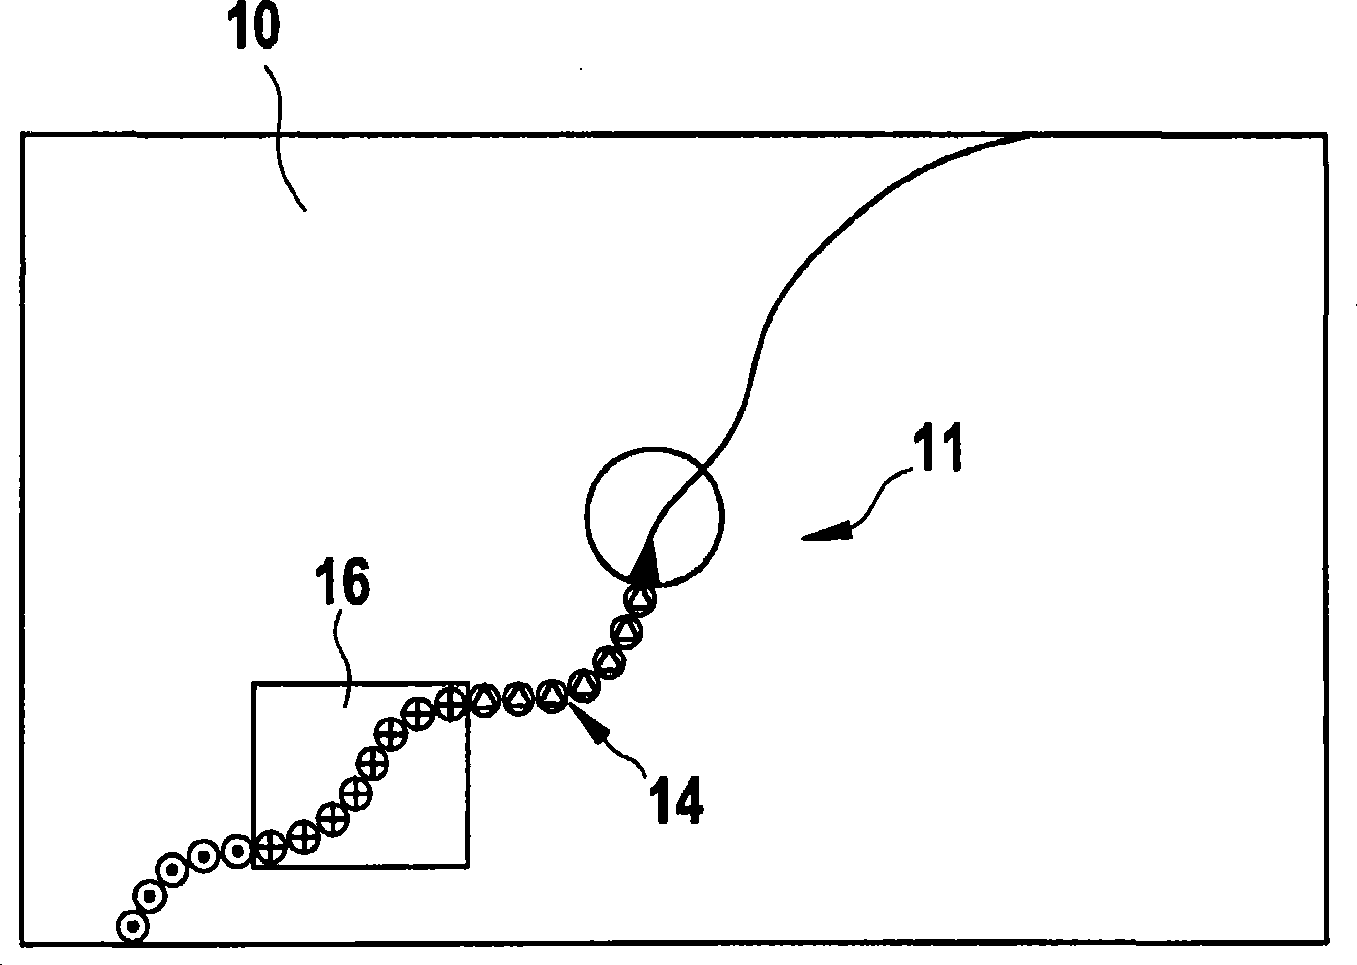 Method for displaying route information for a navigation system